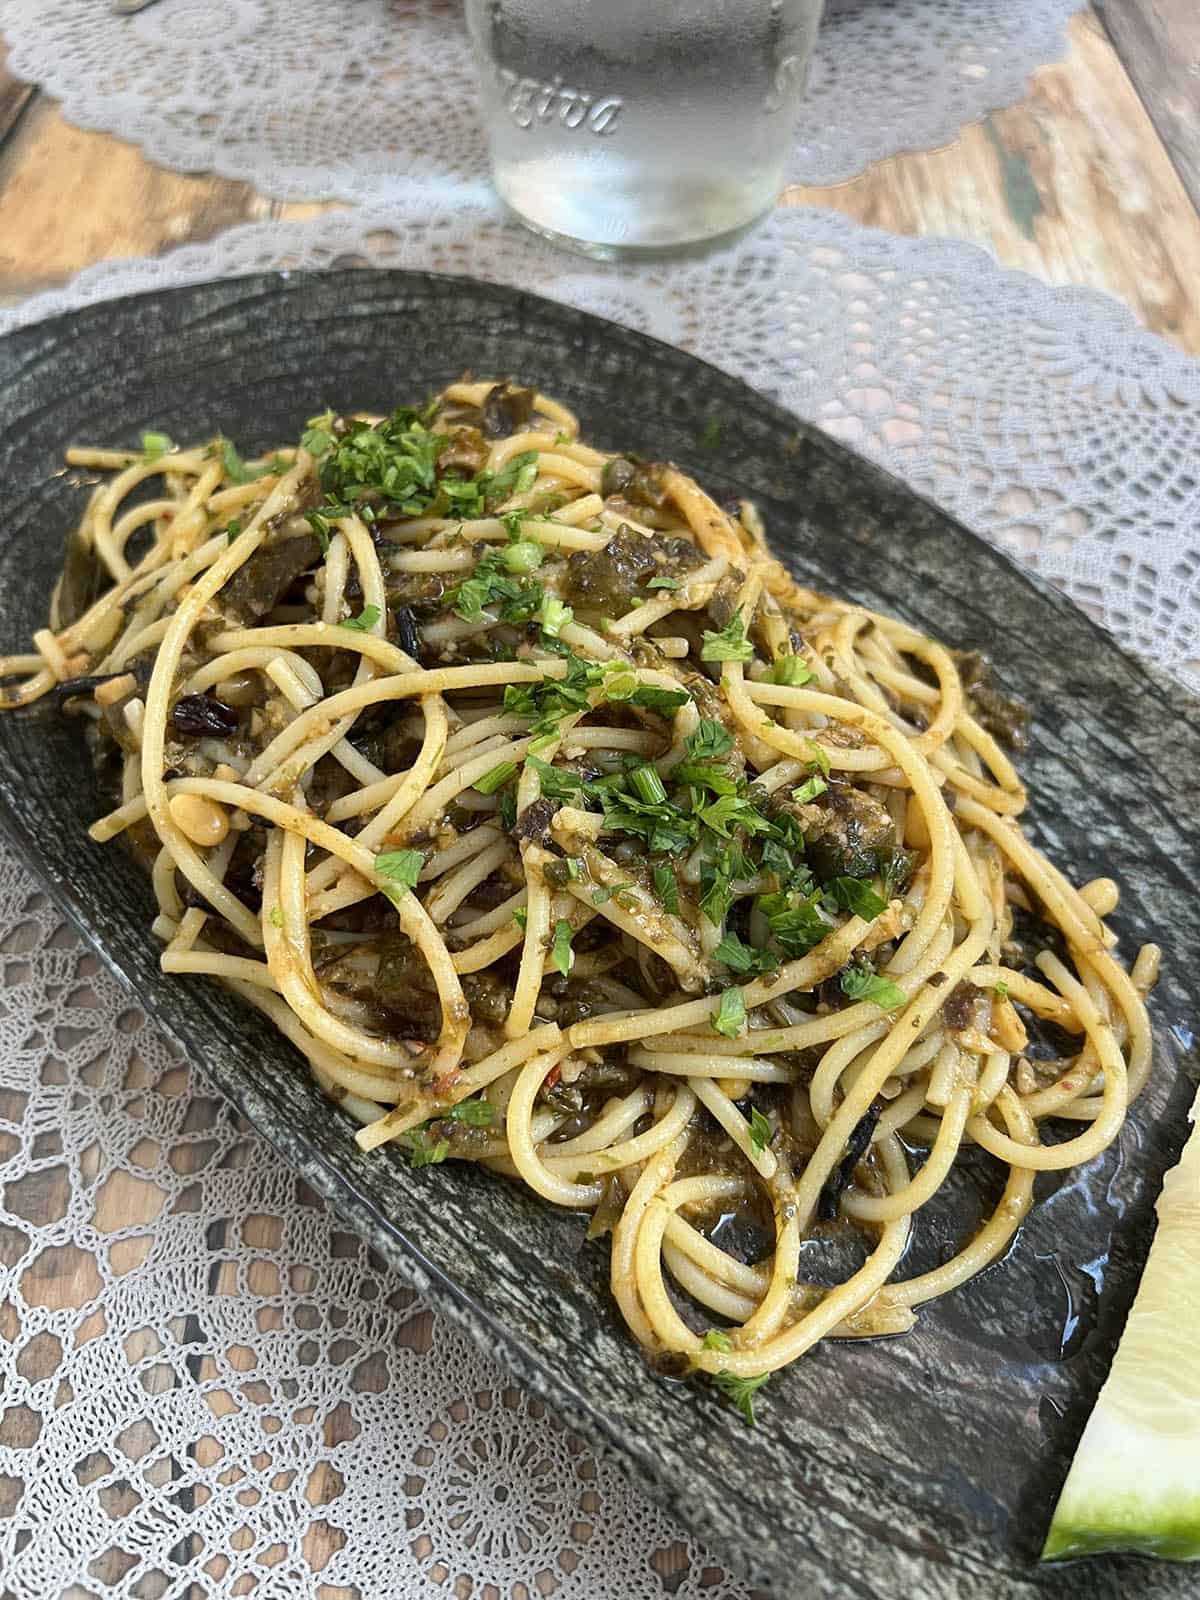 An image of a gluten free vegan take on pasta con le sarde from MOON in Ortigia, Sicily